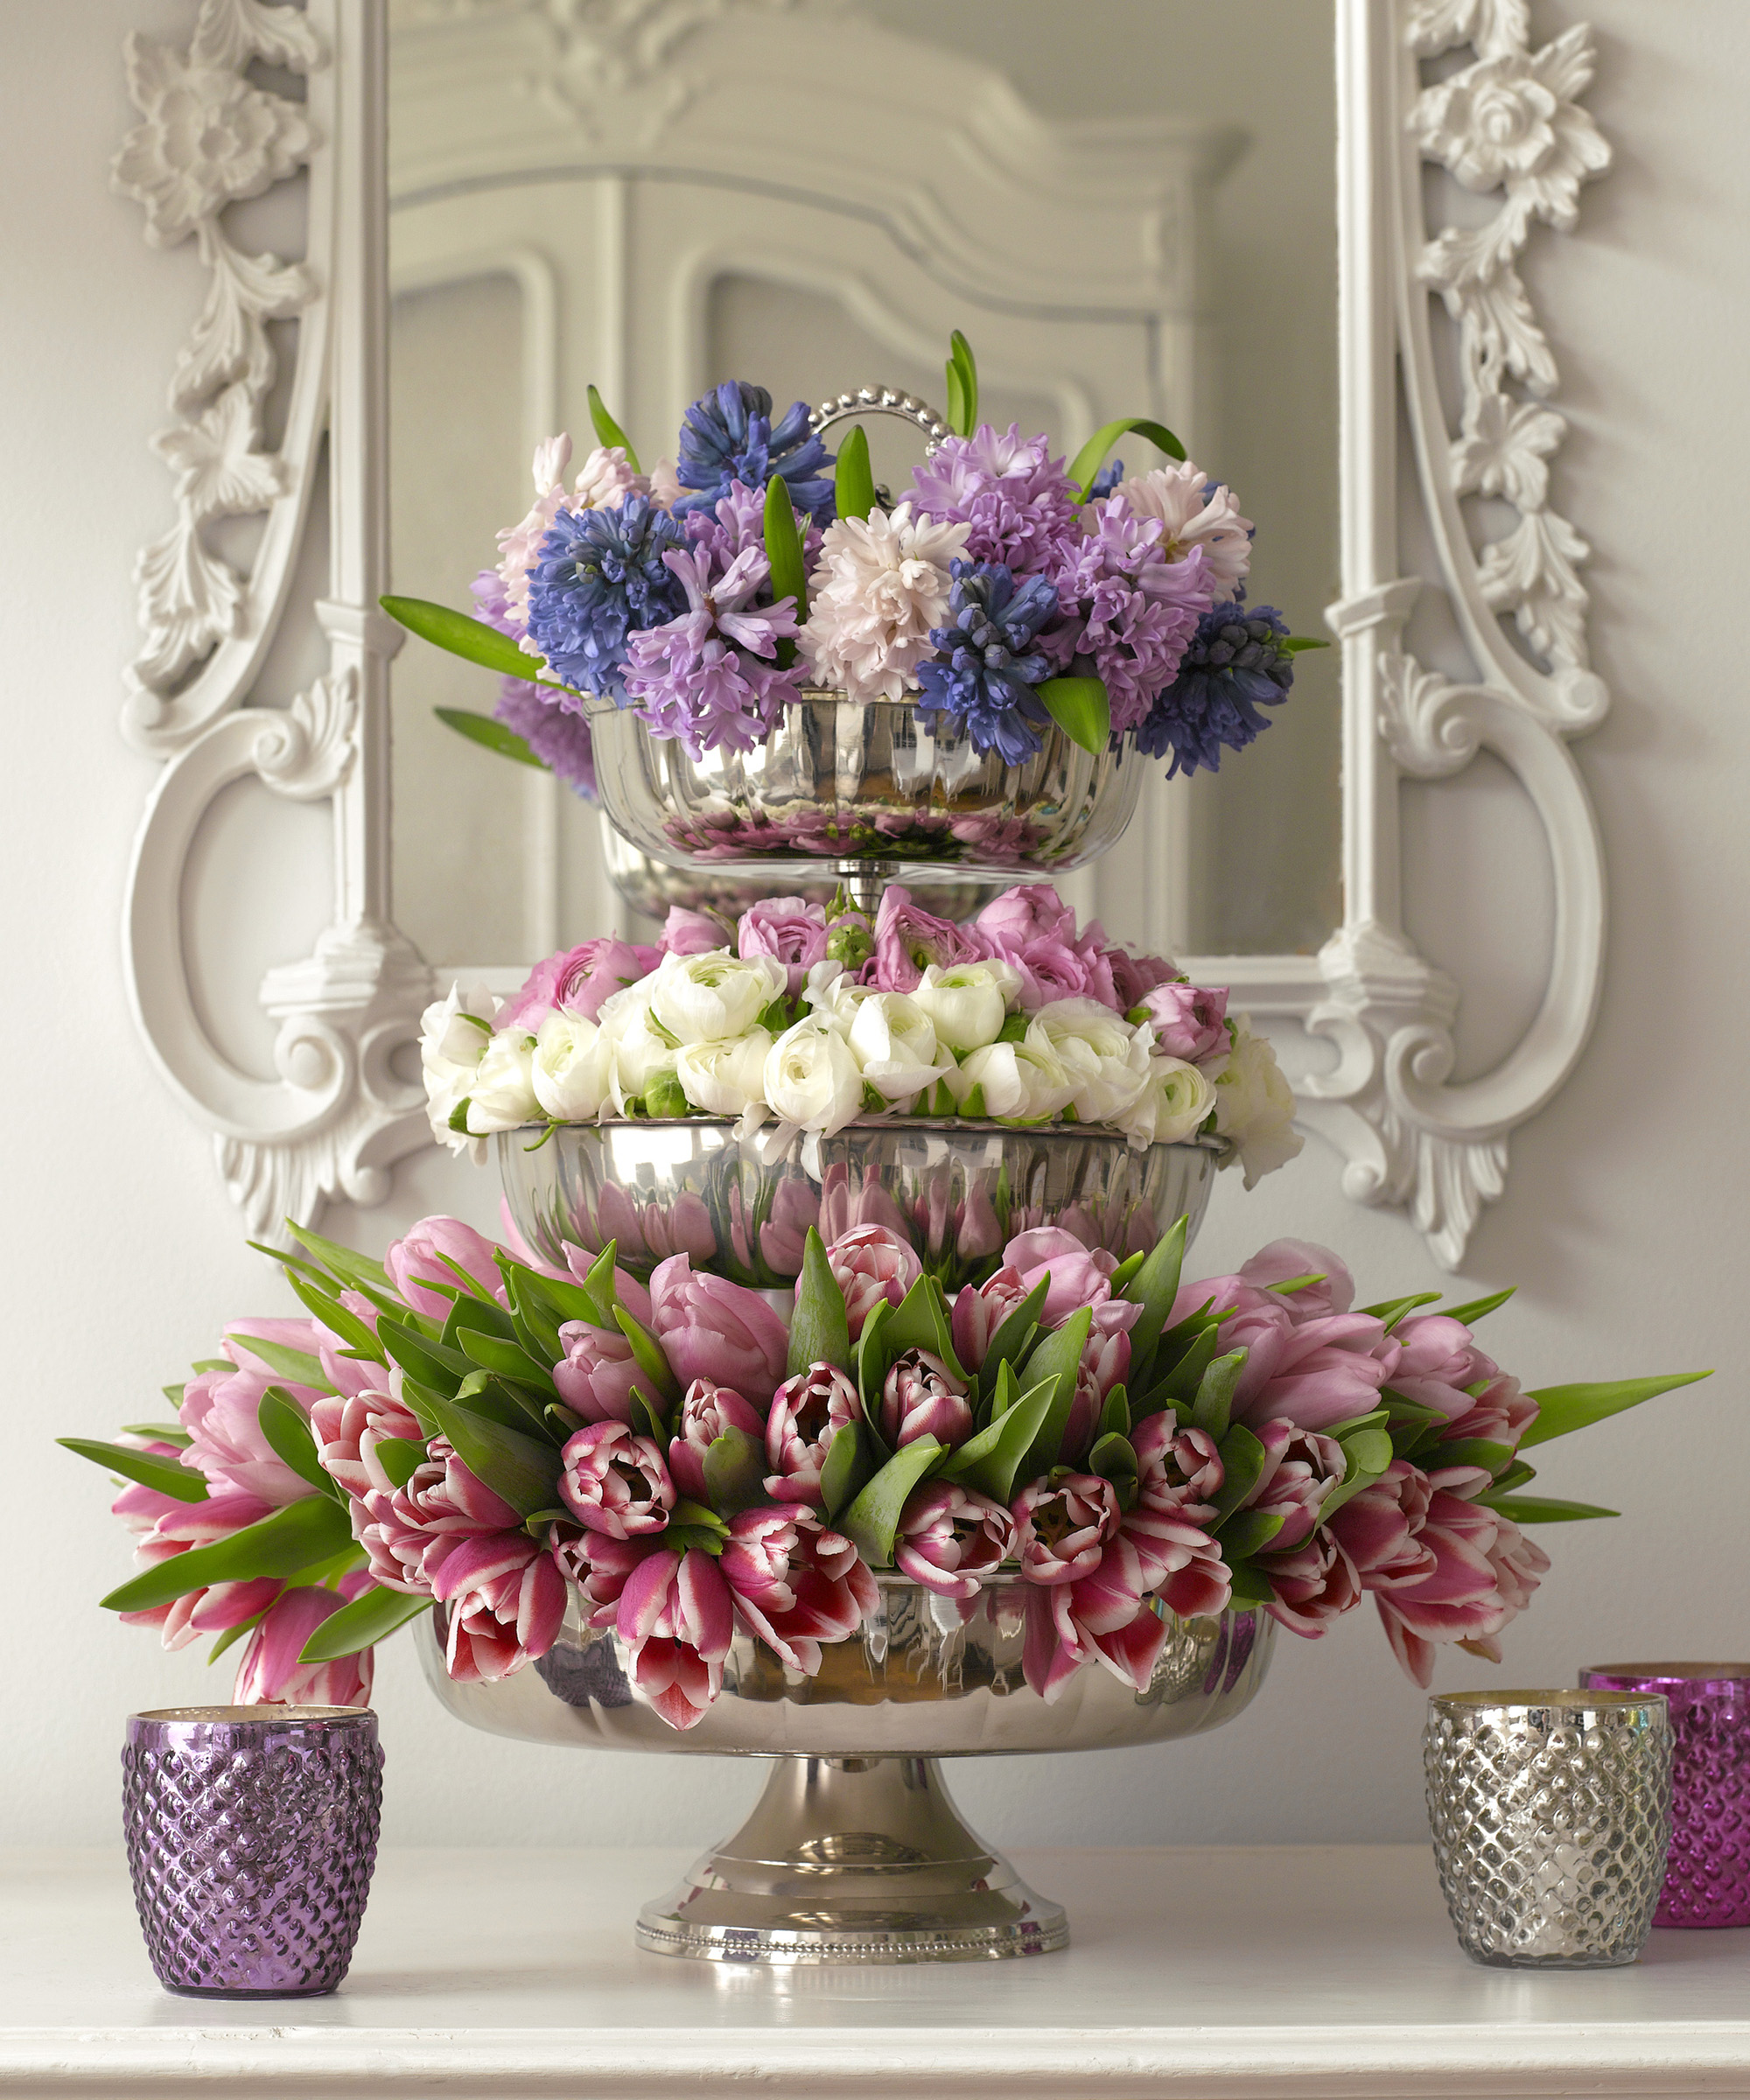 Three-tier silver cake stand filled with tulips, ranunculus, and hyacinths